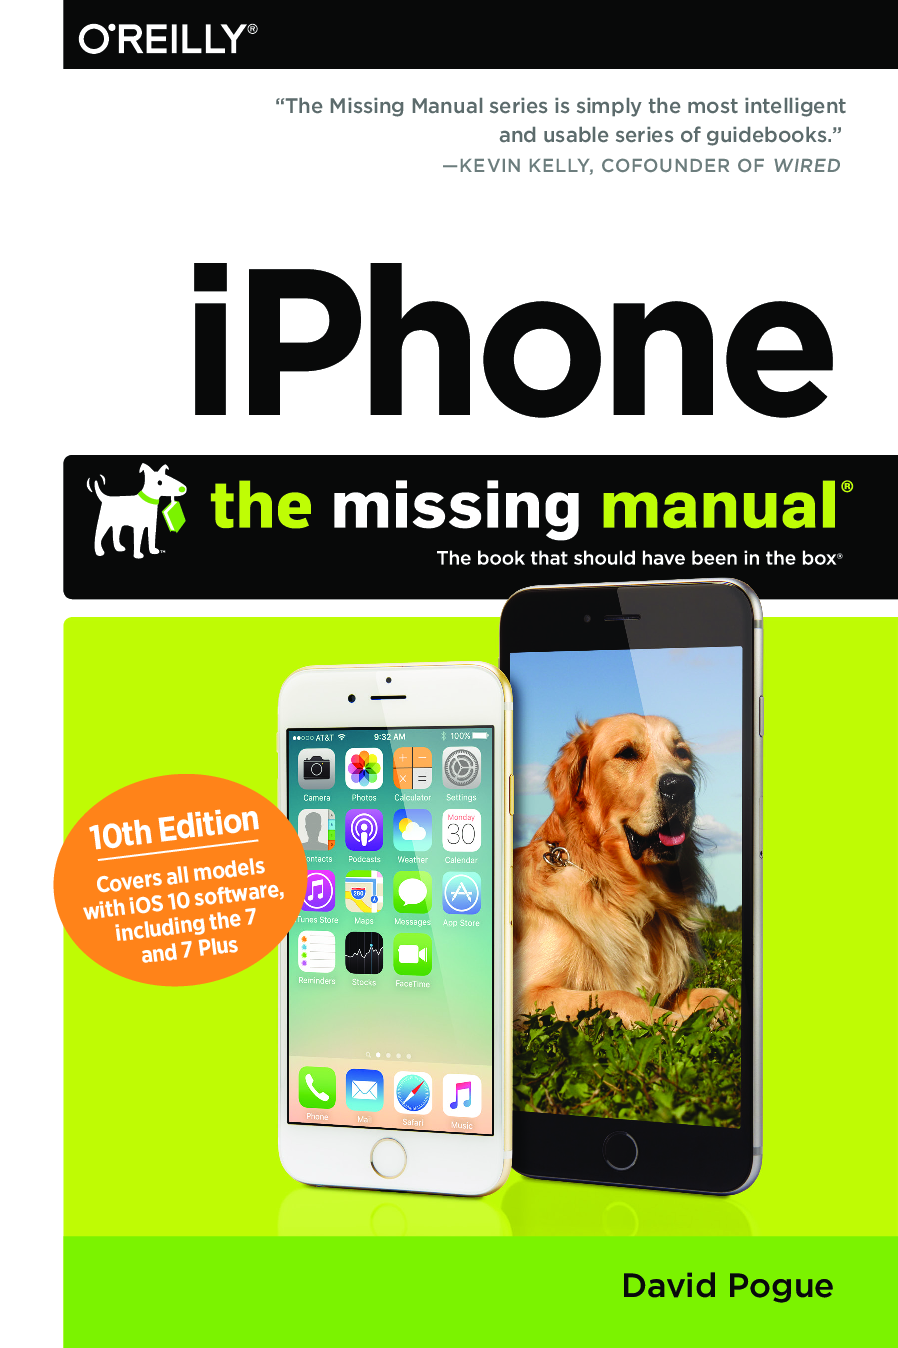 Iphone The Missing Manual 10th Edition Oreilly I Phone The Missing Manual 10th Edition